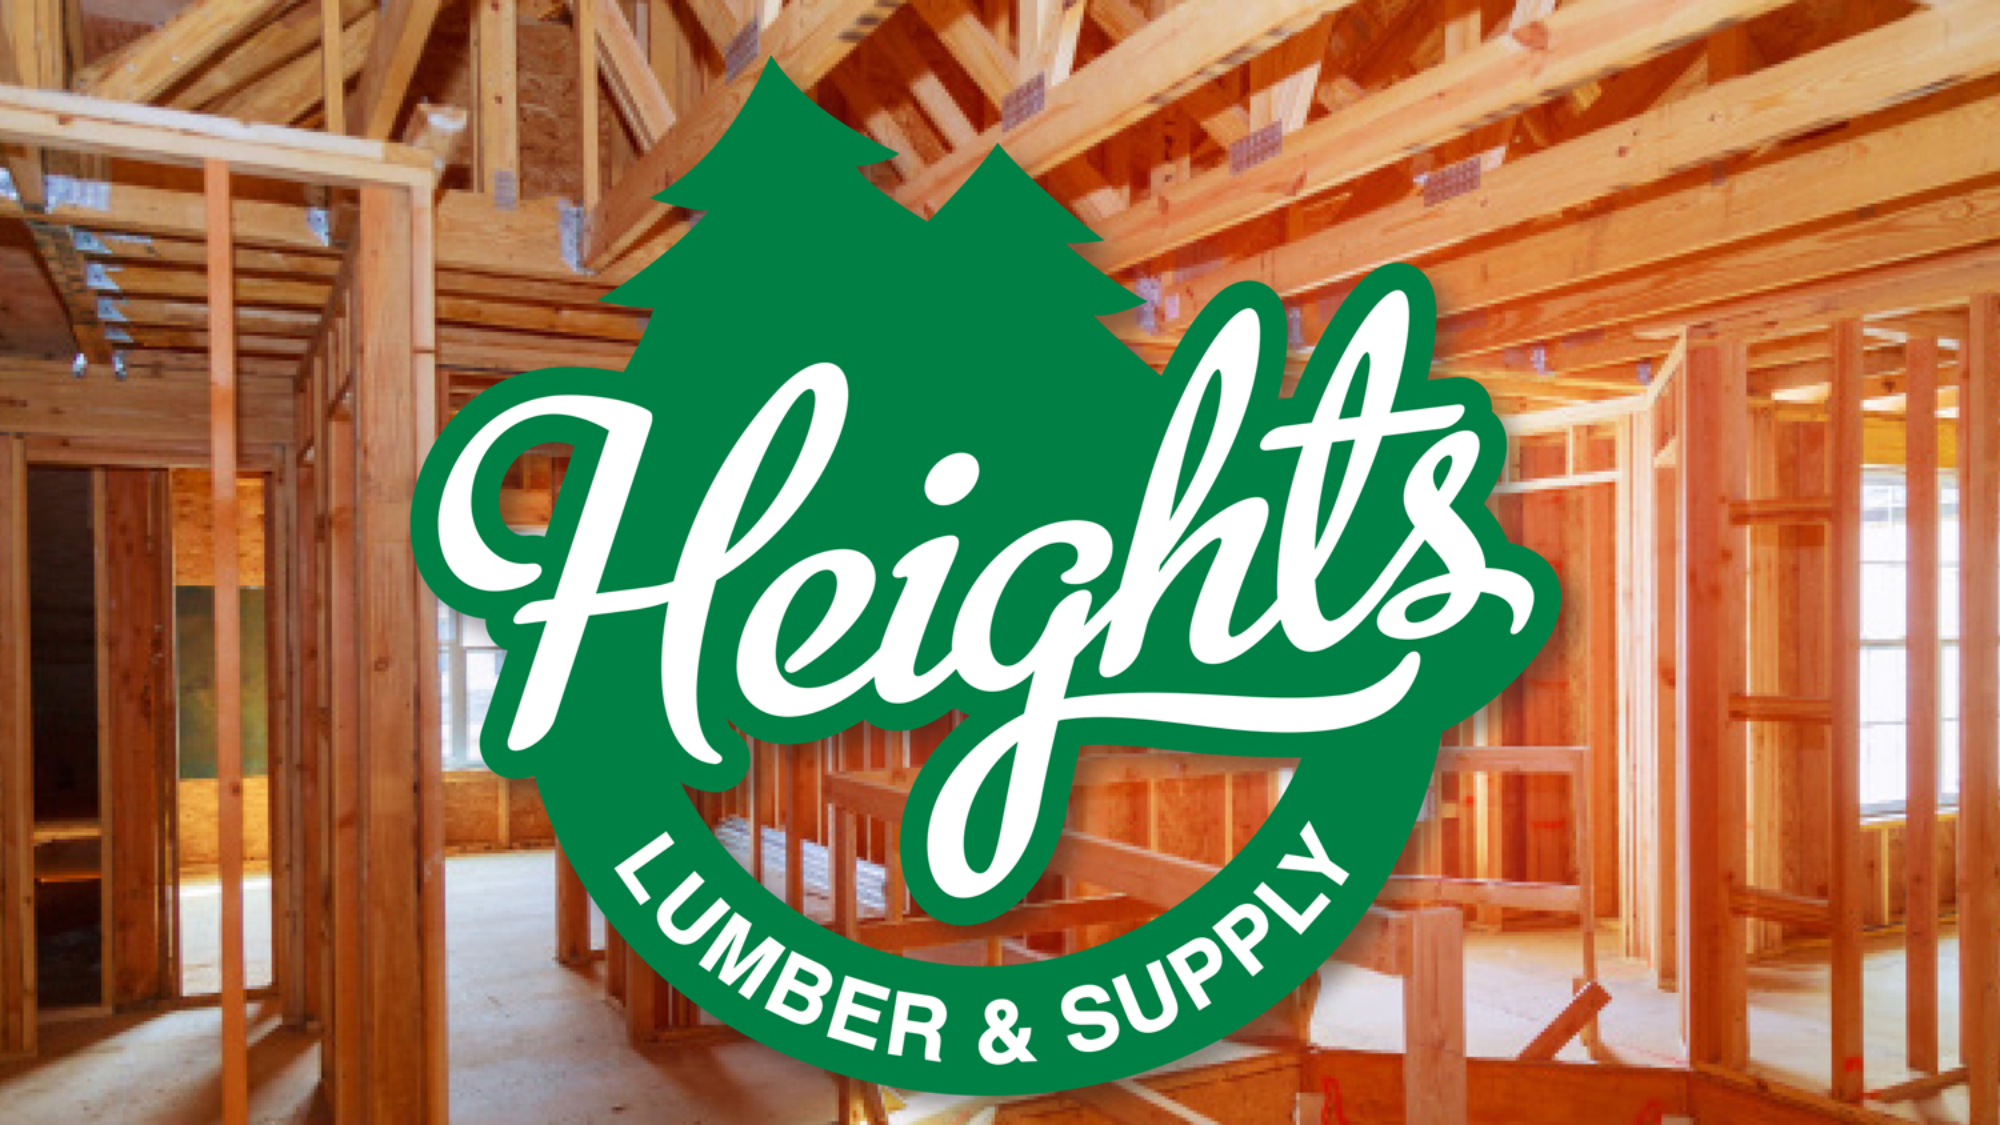 Read our comprehensive review of Heights Lumber and Supply, a trusted provider of construction supplies and building materials. Discover their commitment to quality products, exceptional service, and extensive range of offerings. Partner with Gott Marketing for all your construction supply and marketing needs.